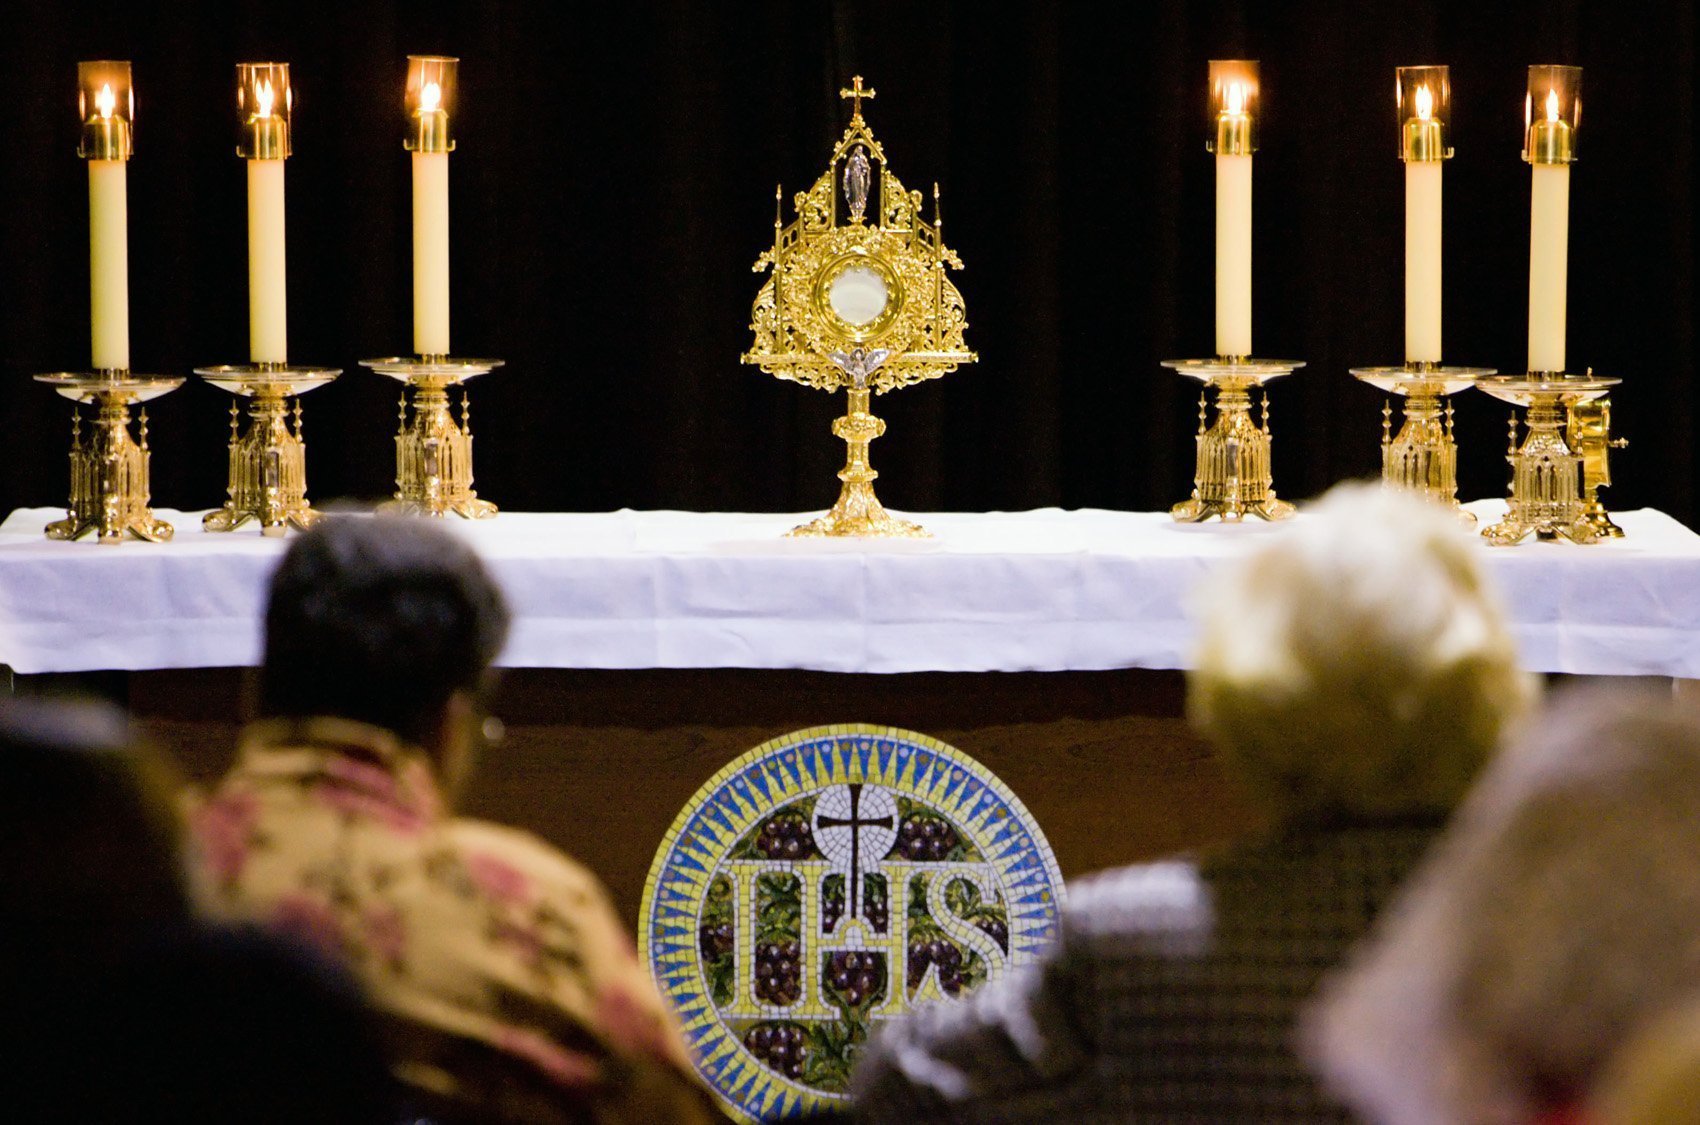 CARA report on the Eucharist: People gather for Eucharistic adoration in this file photo from May 2006. (OSV News photo/Greg Tarczynski)